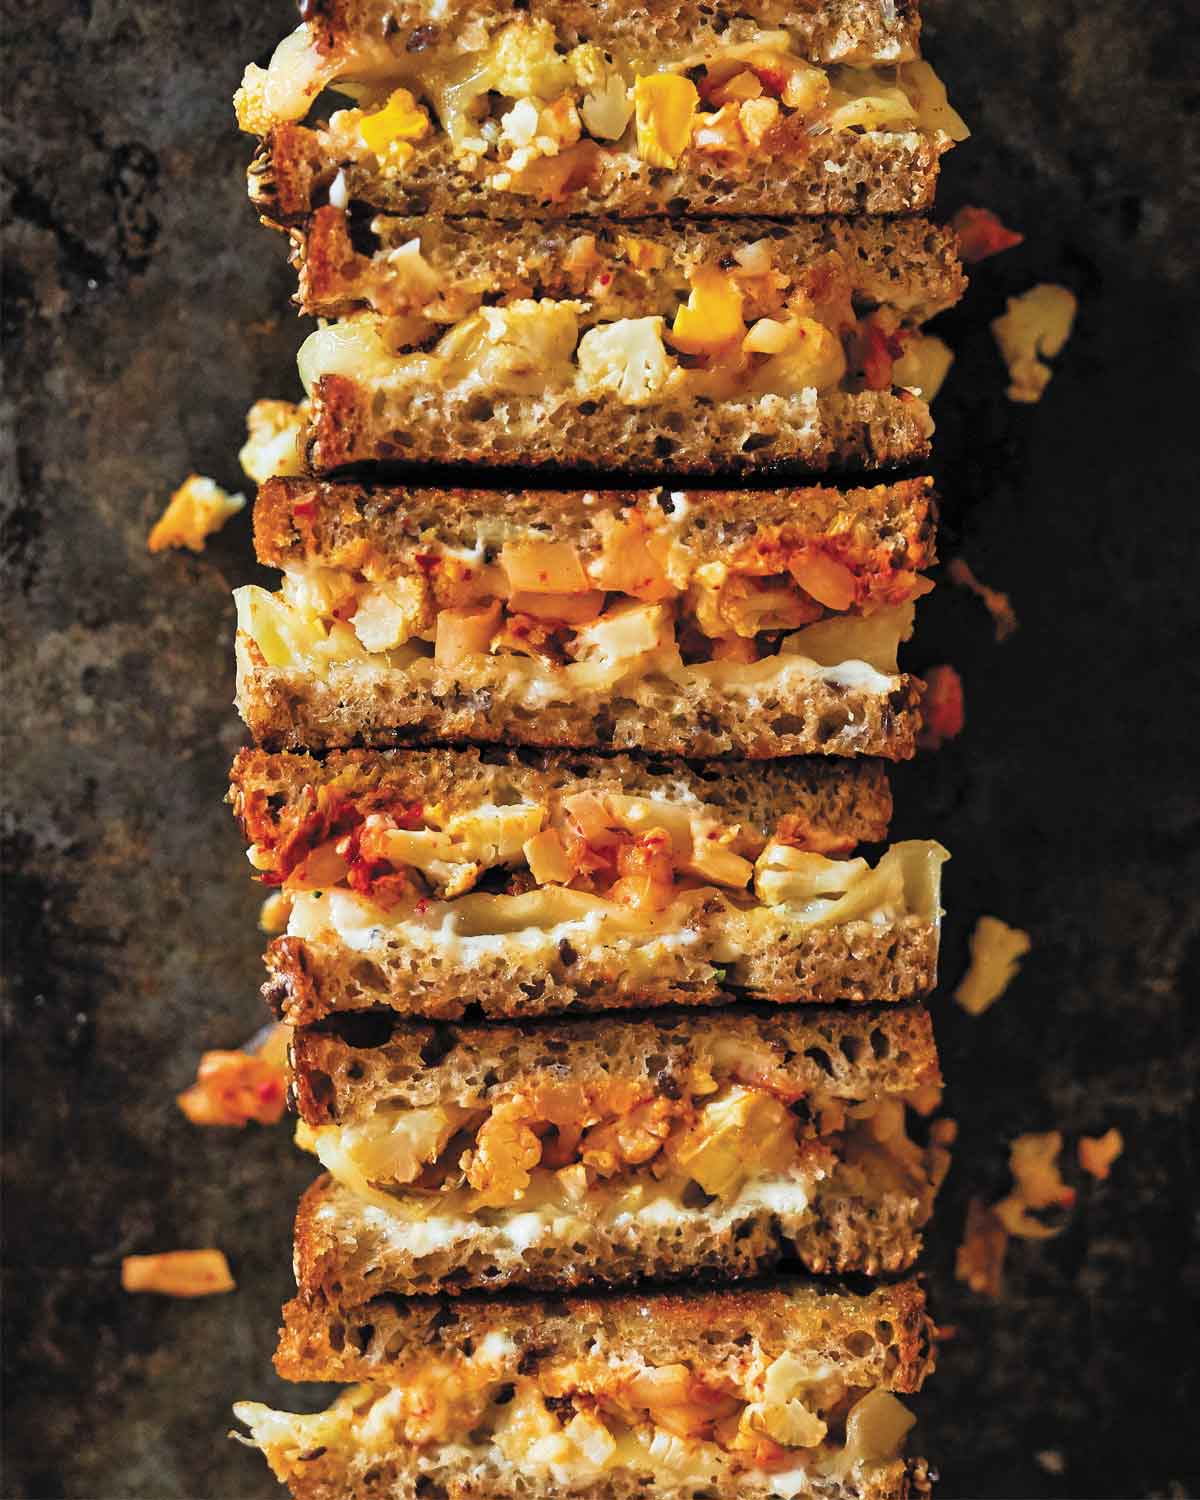 Six sections of cauliflower and kimchi sandwiches cut to show the filling.